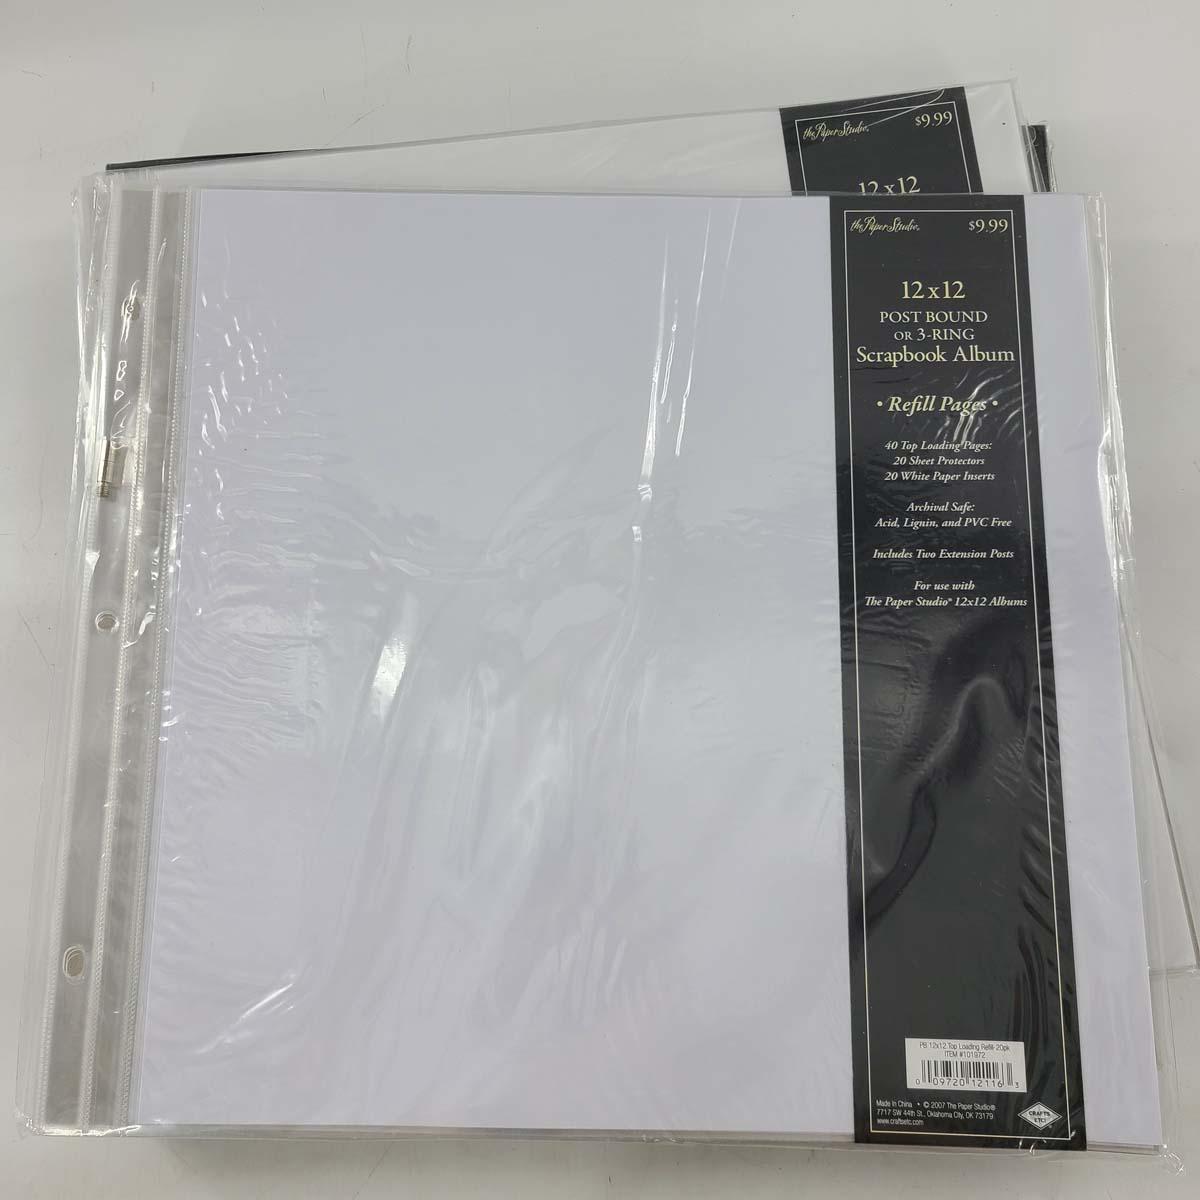  12 x 12 Strap Hinge Refill Page Value Pack